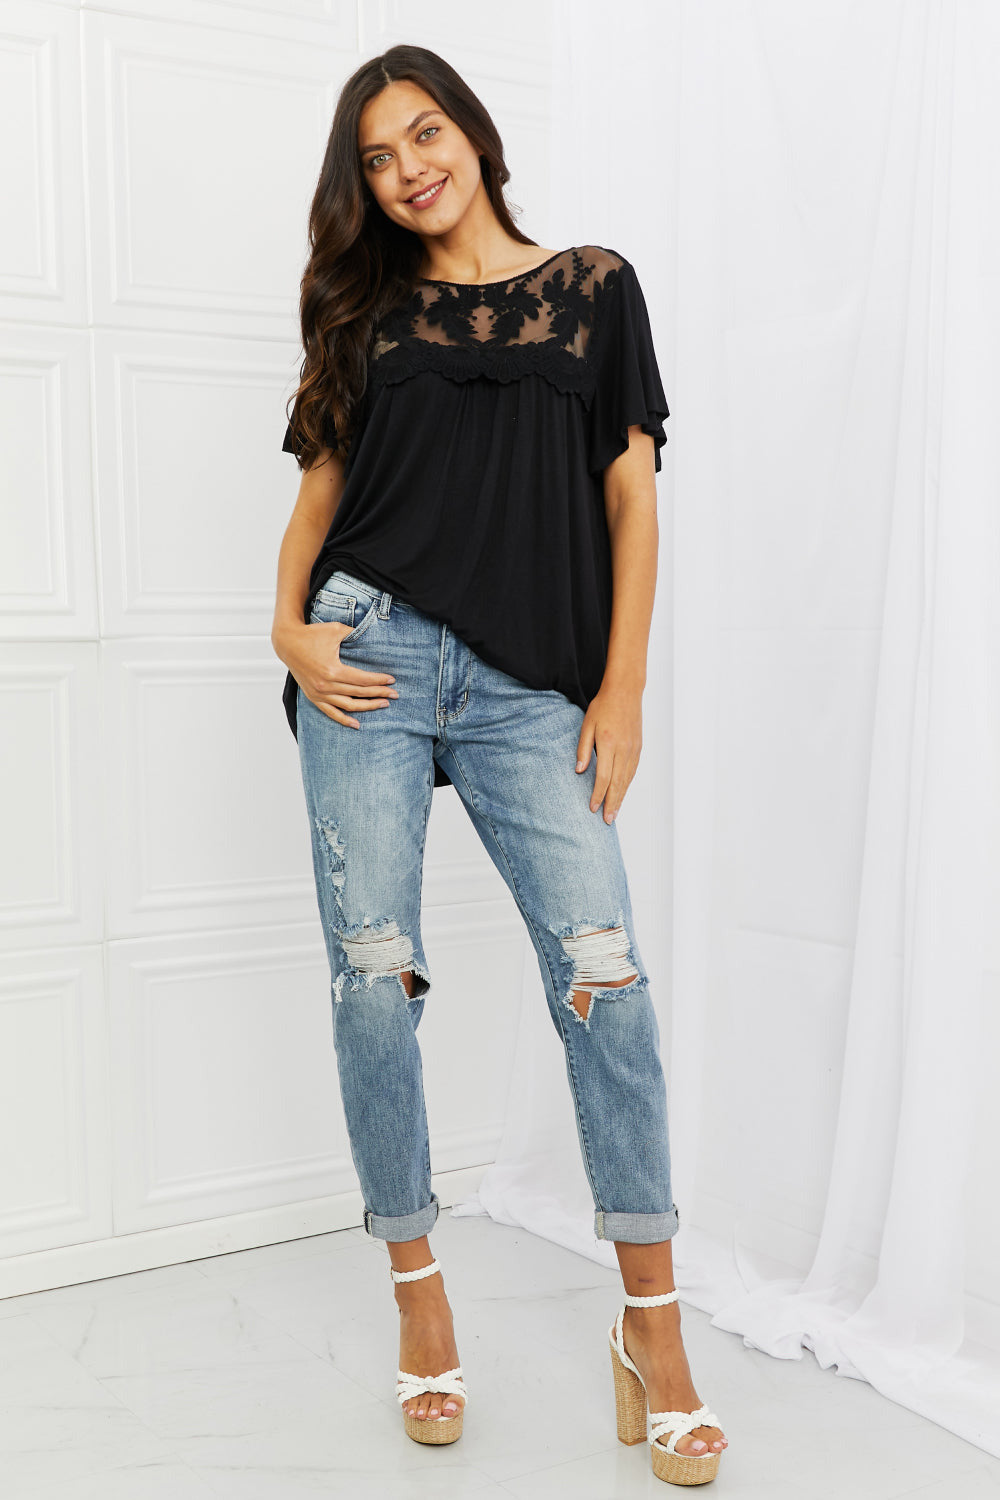 Culture Code Ready To Go Full Size Lace Embroidered Top in Black